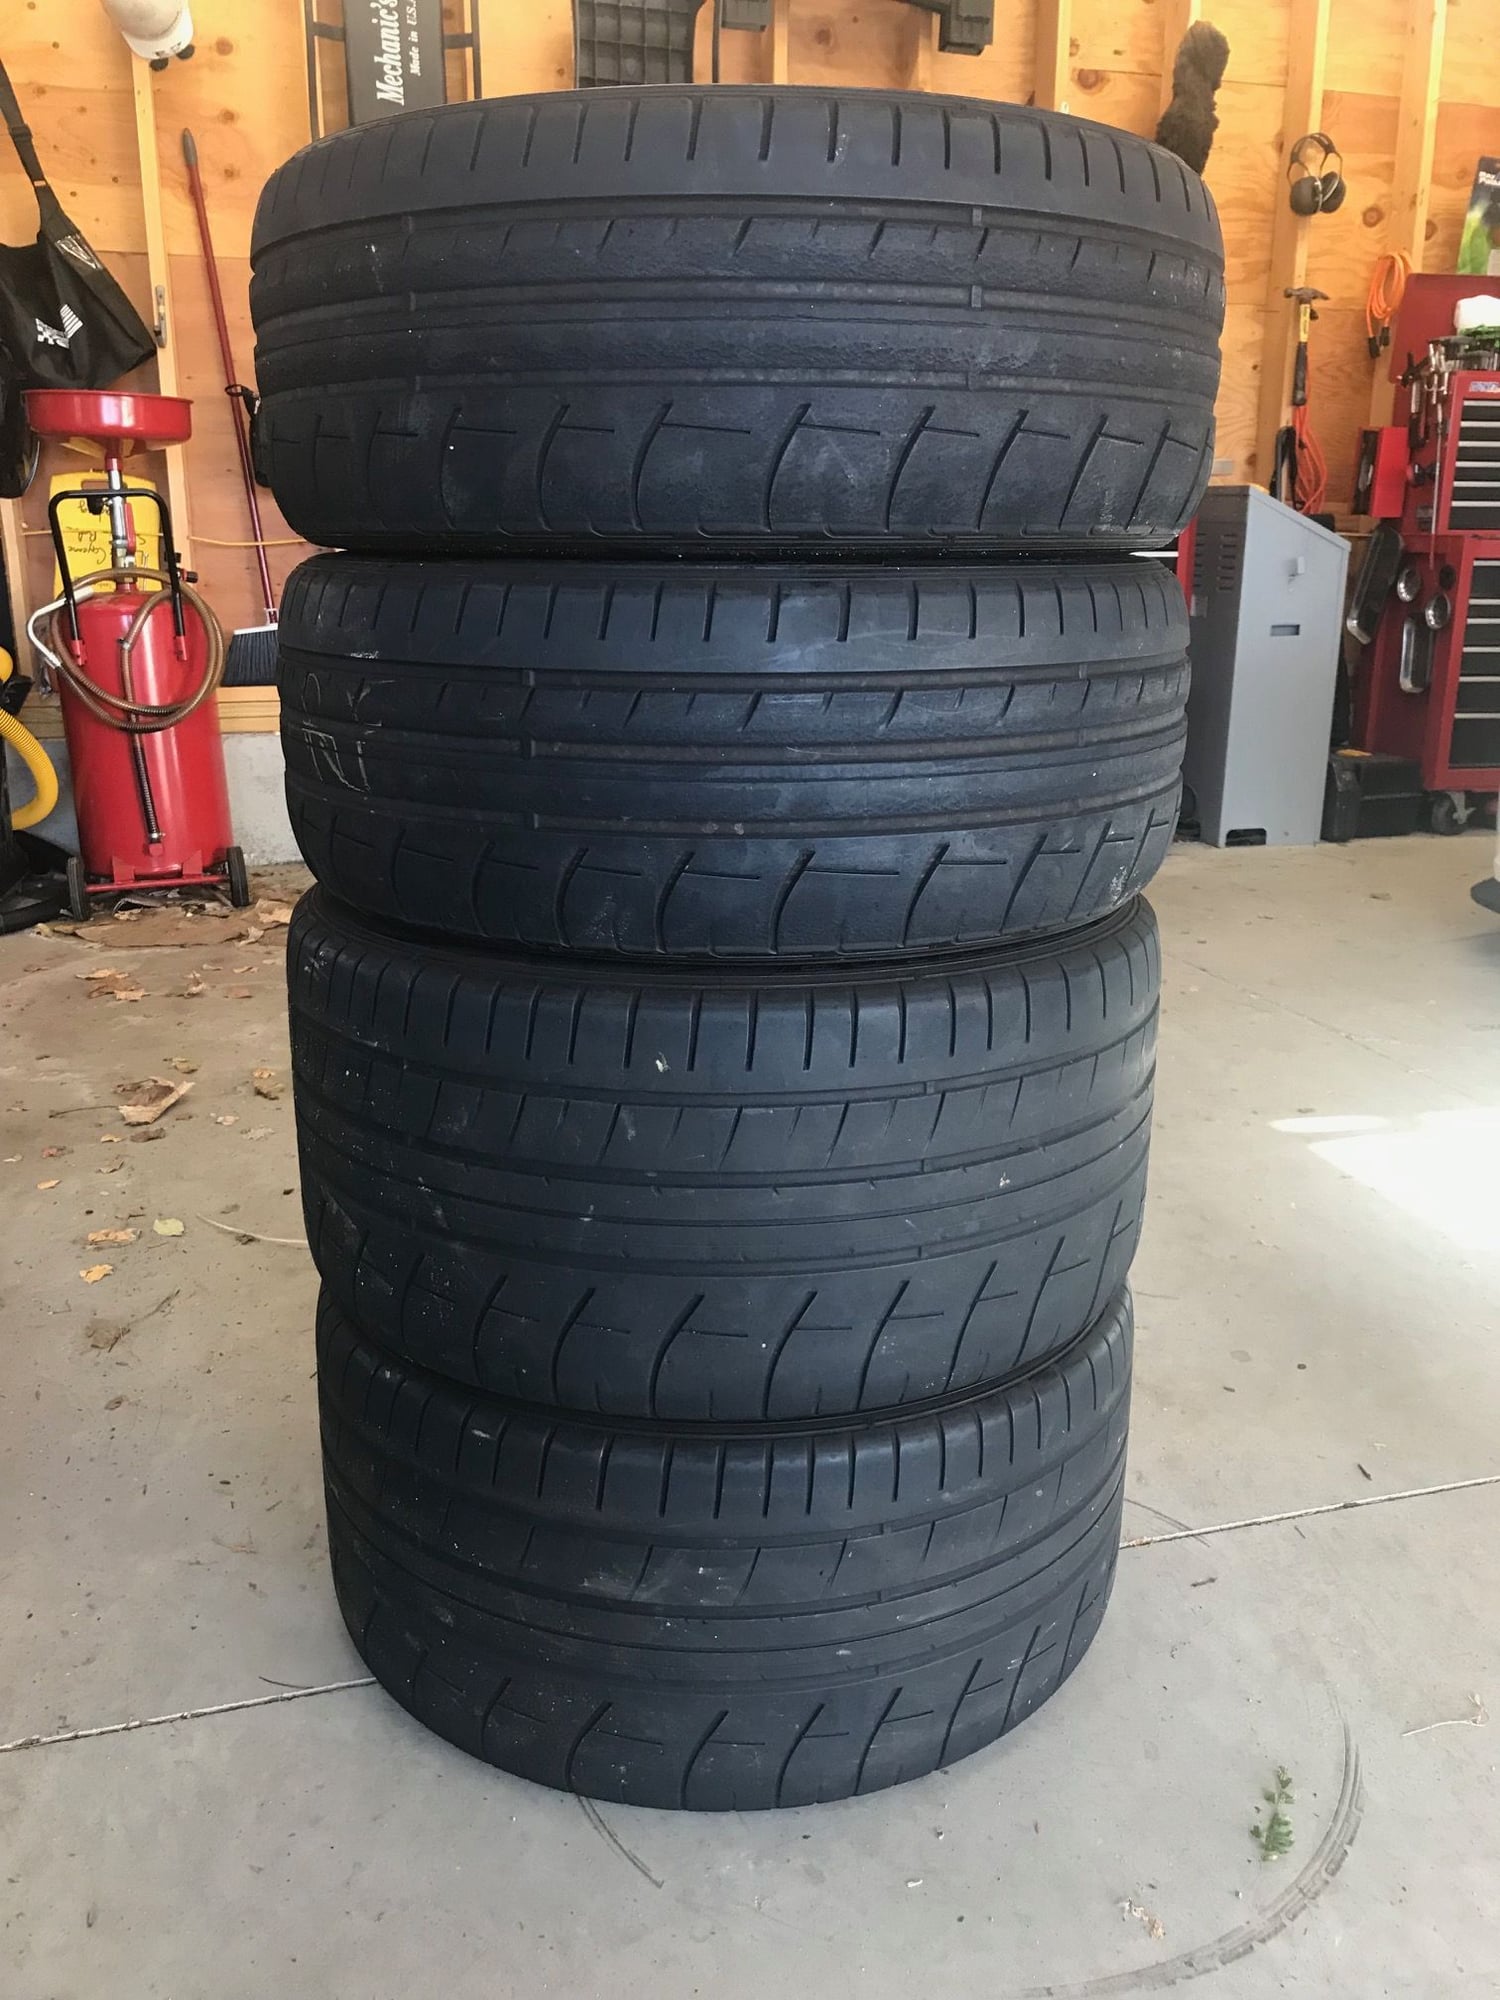 Wheels and Tires/Axles - Dunlop Sport Maxx Race tires - GT4 sizes - Used - 2013 to 2019 Porsche Cayman GT4 - 2012 to 2016 Porsche 911 - 2013 to 2019 Porsche Boxster - 2013 to 2019 Porsche Cayman - Bedford, NH 03110, United States